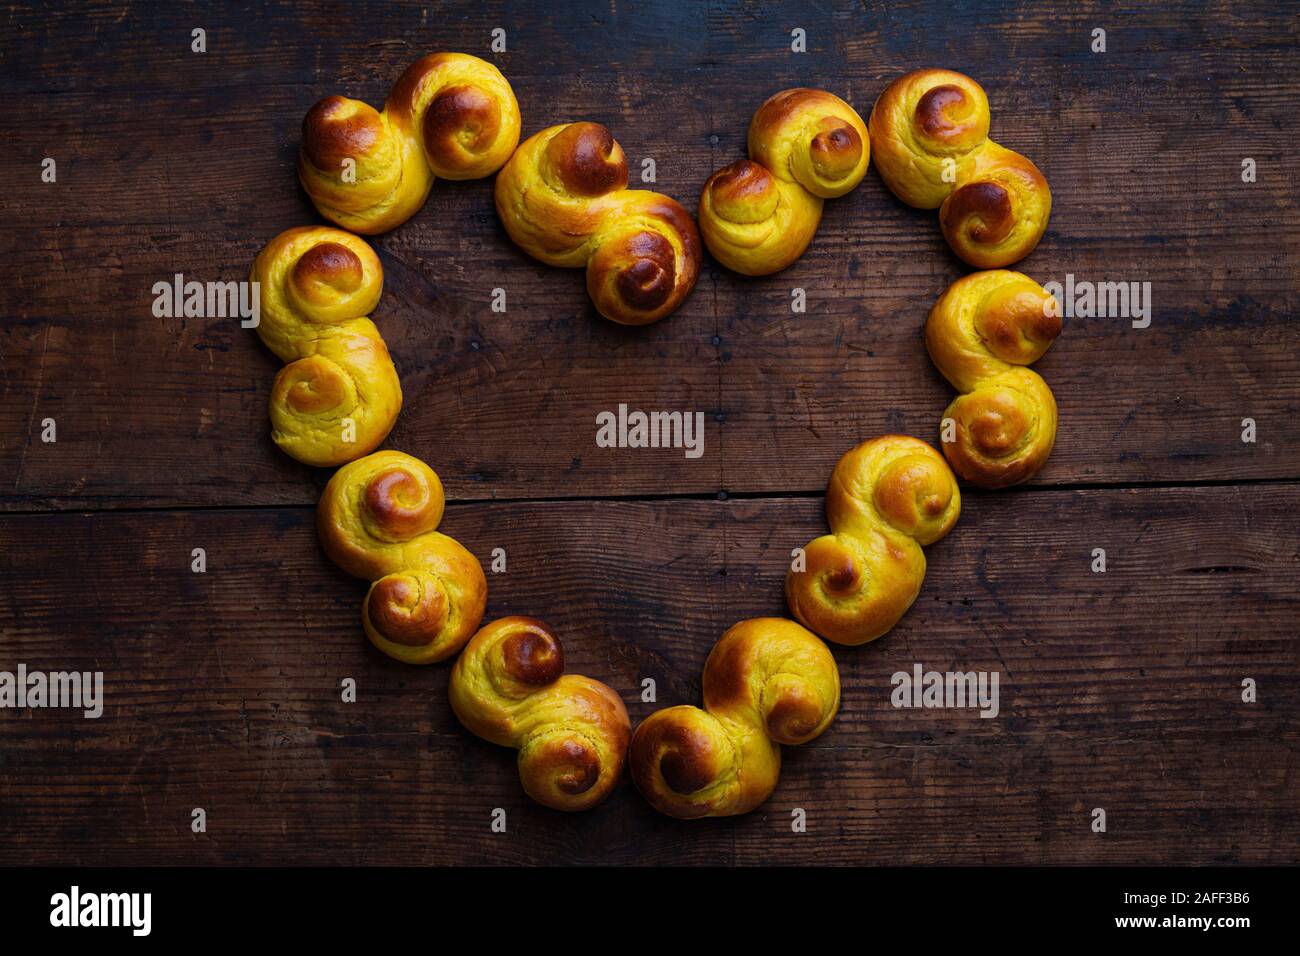 Swedish traditional christmas bun Lussekatter or Lussebullar on a rustic wooden table, in the shape of a heart. The buns are freshly made and homemade Stock Photo